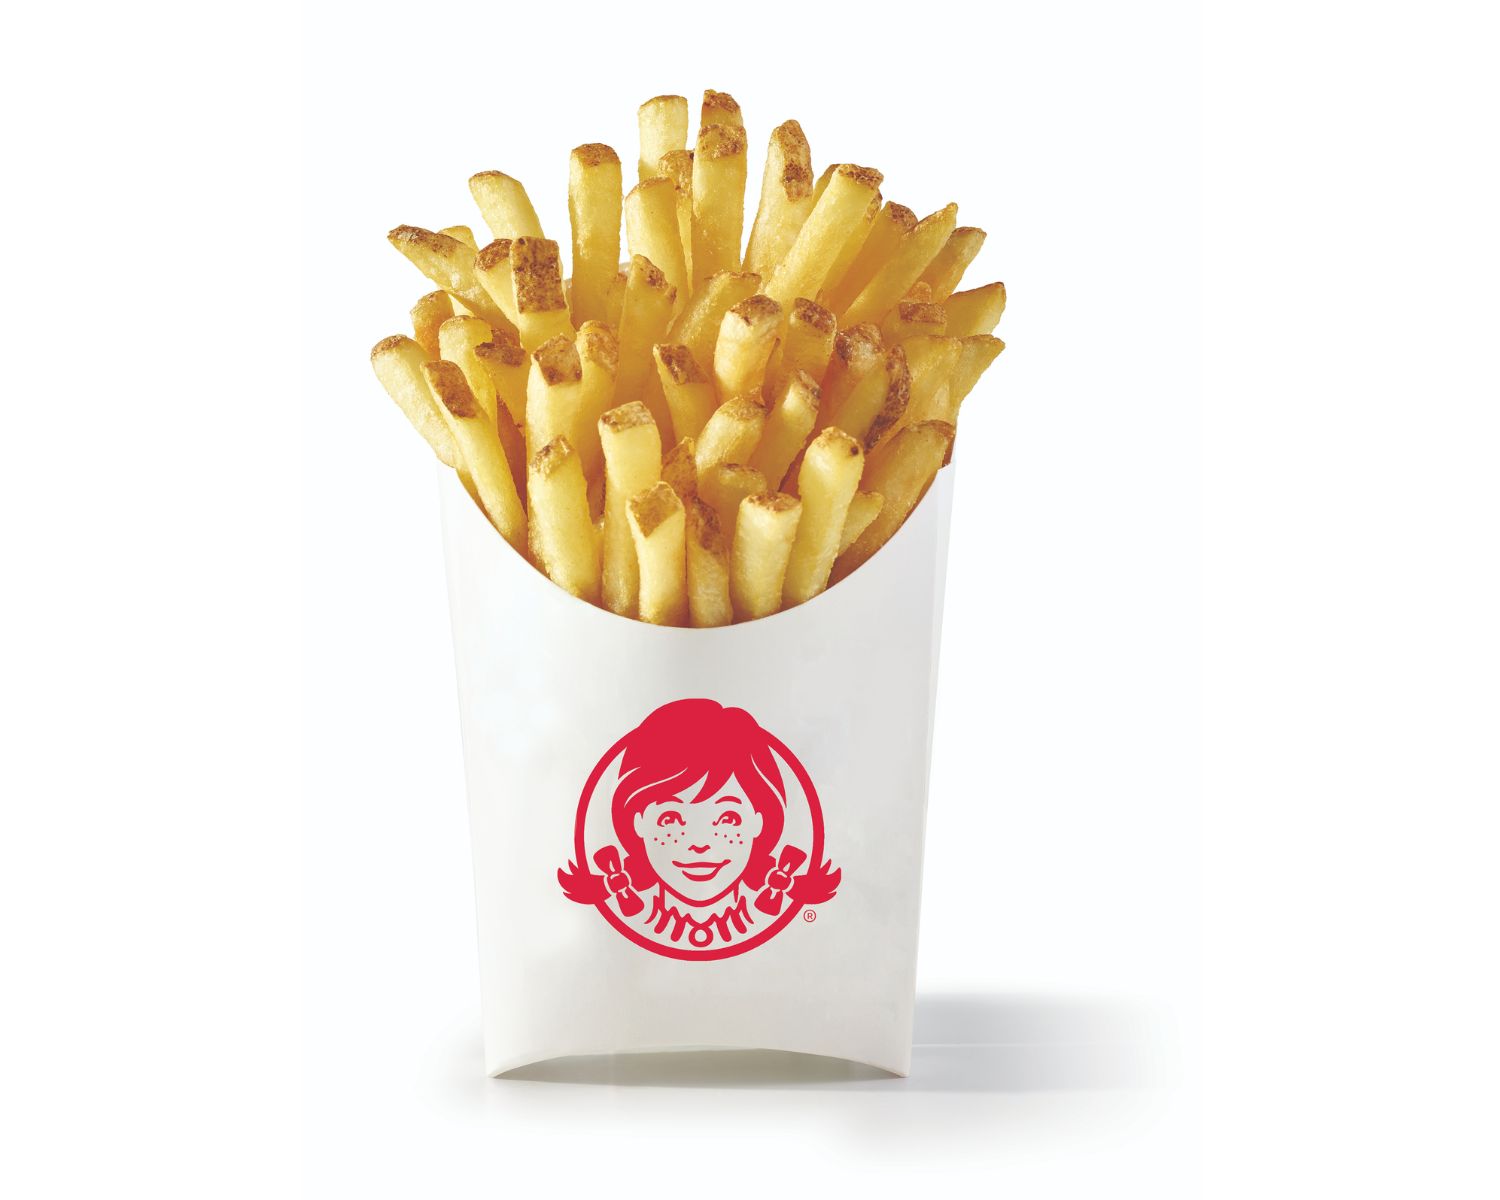 10-wendys-french-fries-nutrition-facts